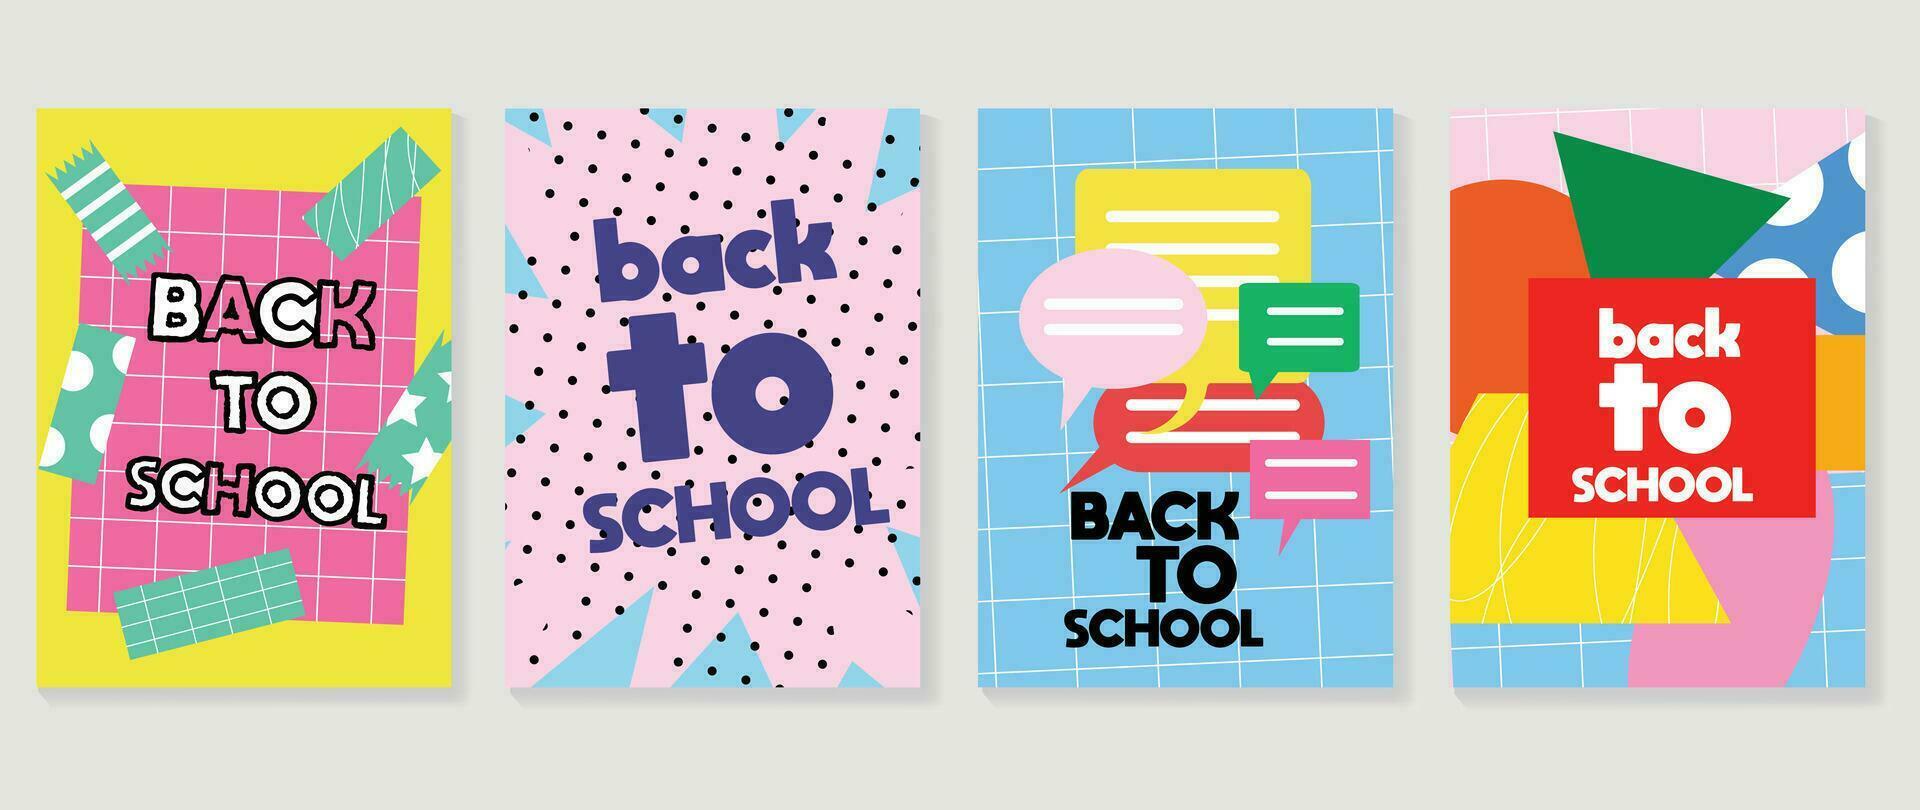 Welcome back to school cover background vector set. Cute childhood illustration with geometric shapes, speech bubble, dot, colorful. Back to school collection for prints, education, banner.